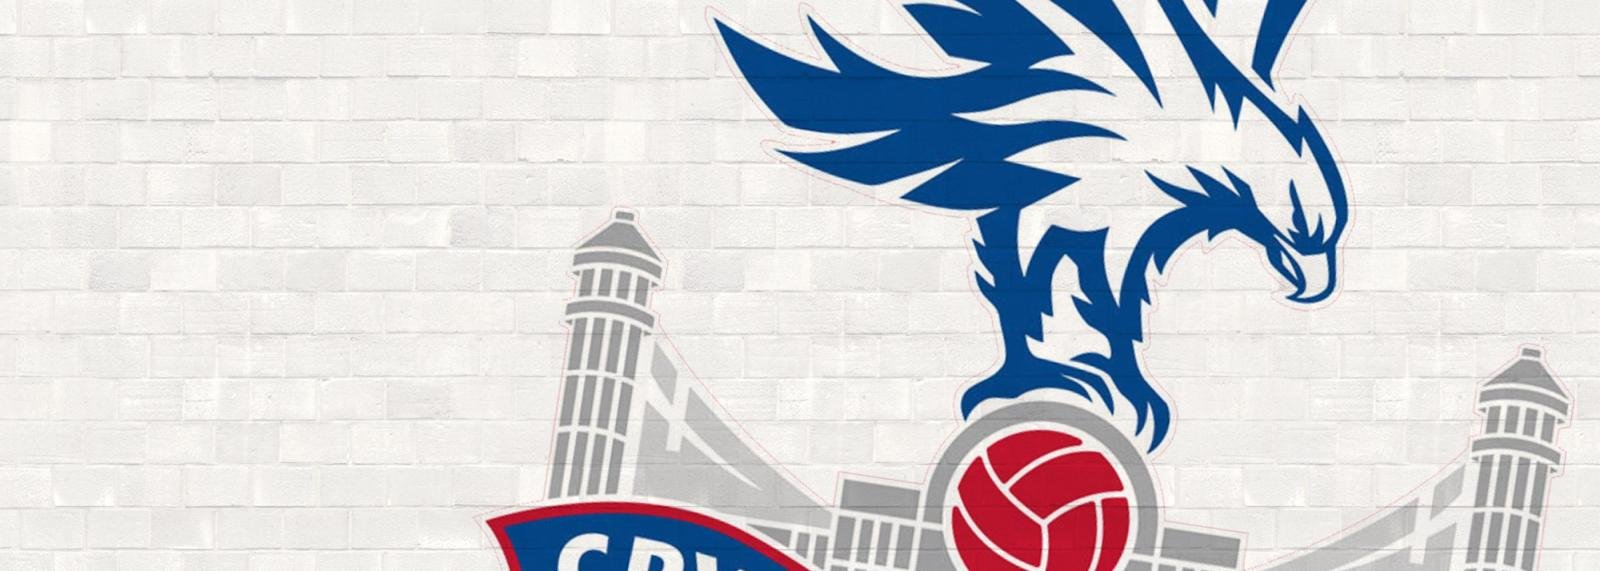 Crystal Palace pick up momentum ahead of their FA Cup semi-final outing at Wembley